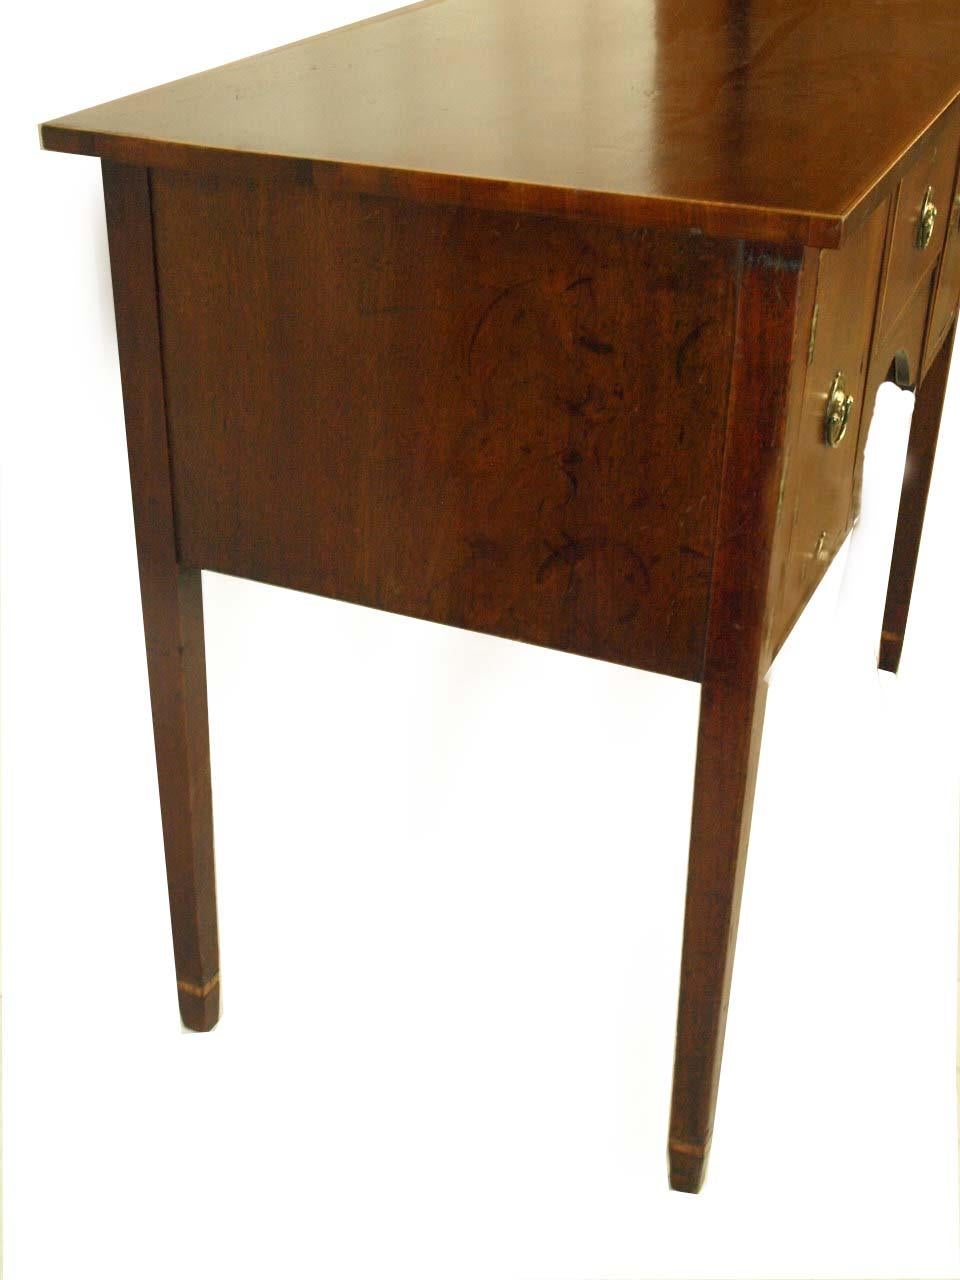 English mahogany Hepplewhite server with bands of inlay around the top, drawer and doors; the tapered legs banded with inlay , the concave apron with boxwood string inlay; the brass pulls appear to be antique, but are not original., notice the